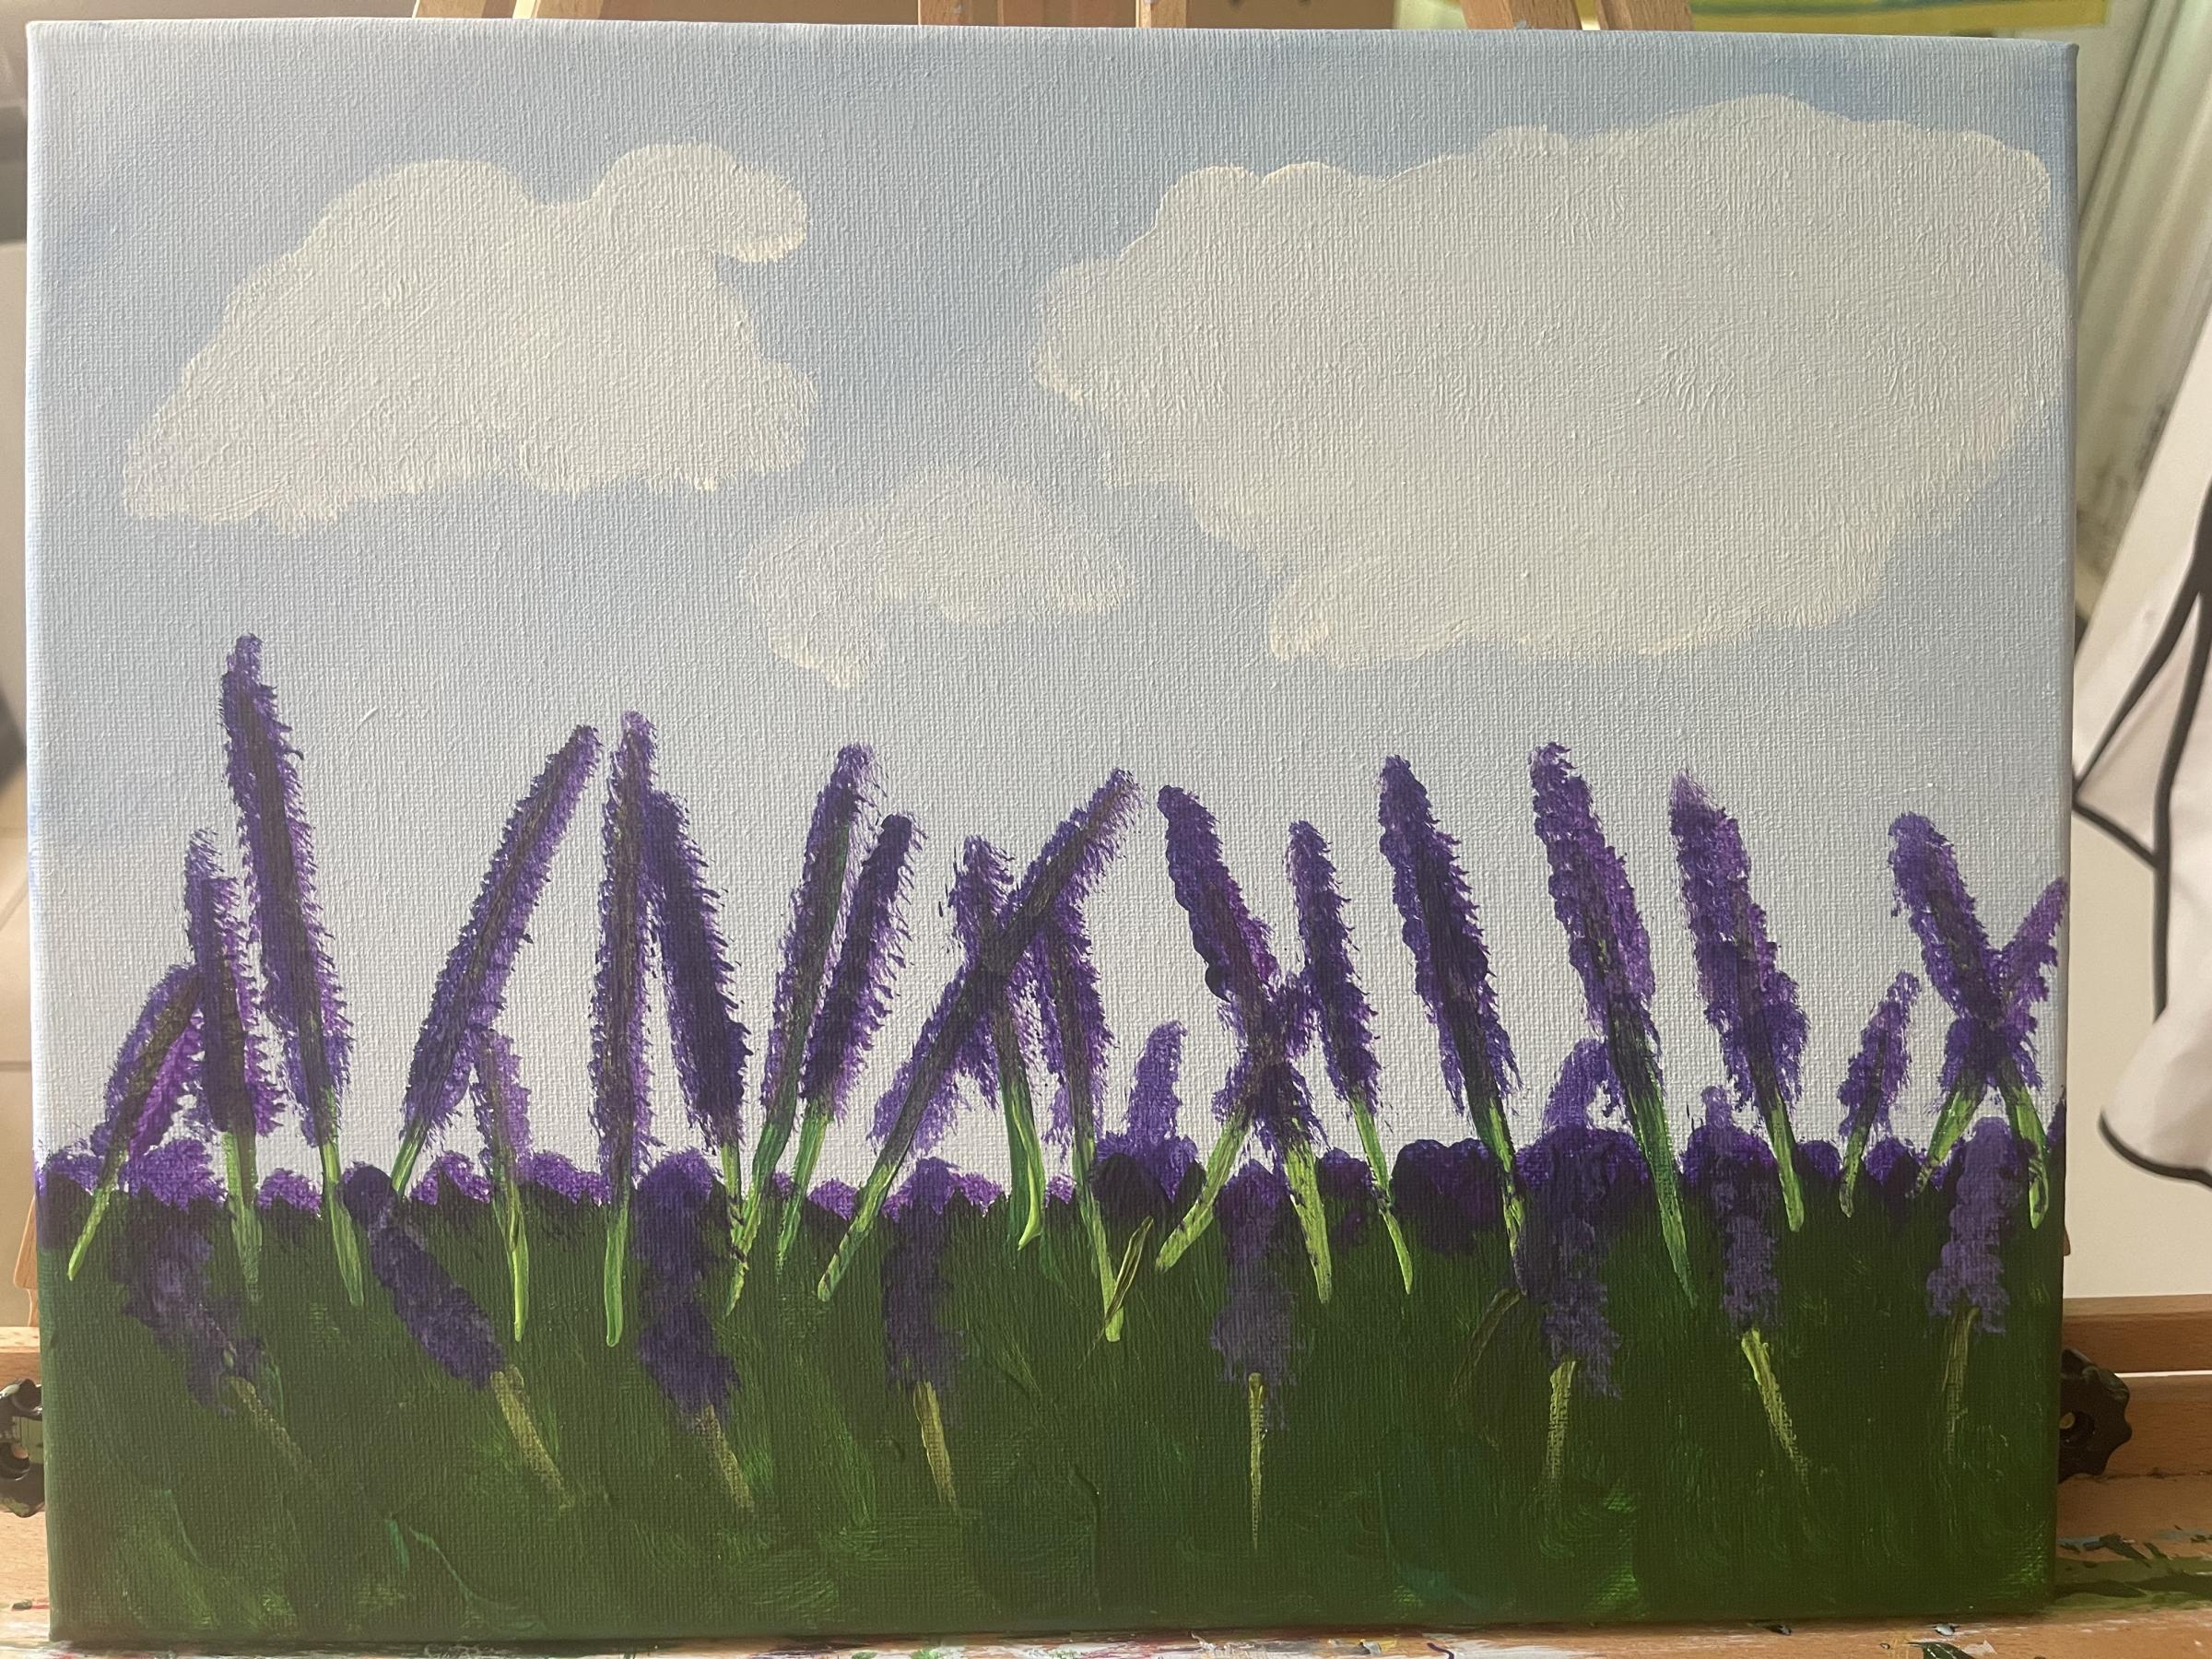 Lavender flowers in a field with clouded sky